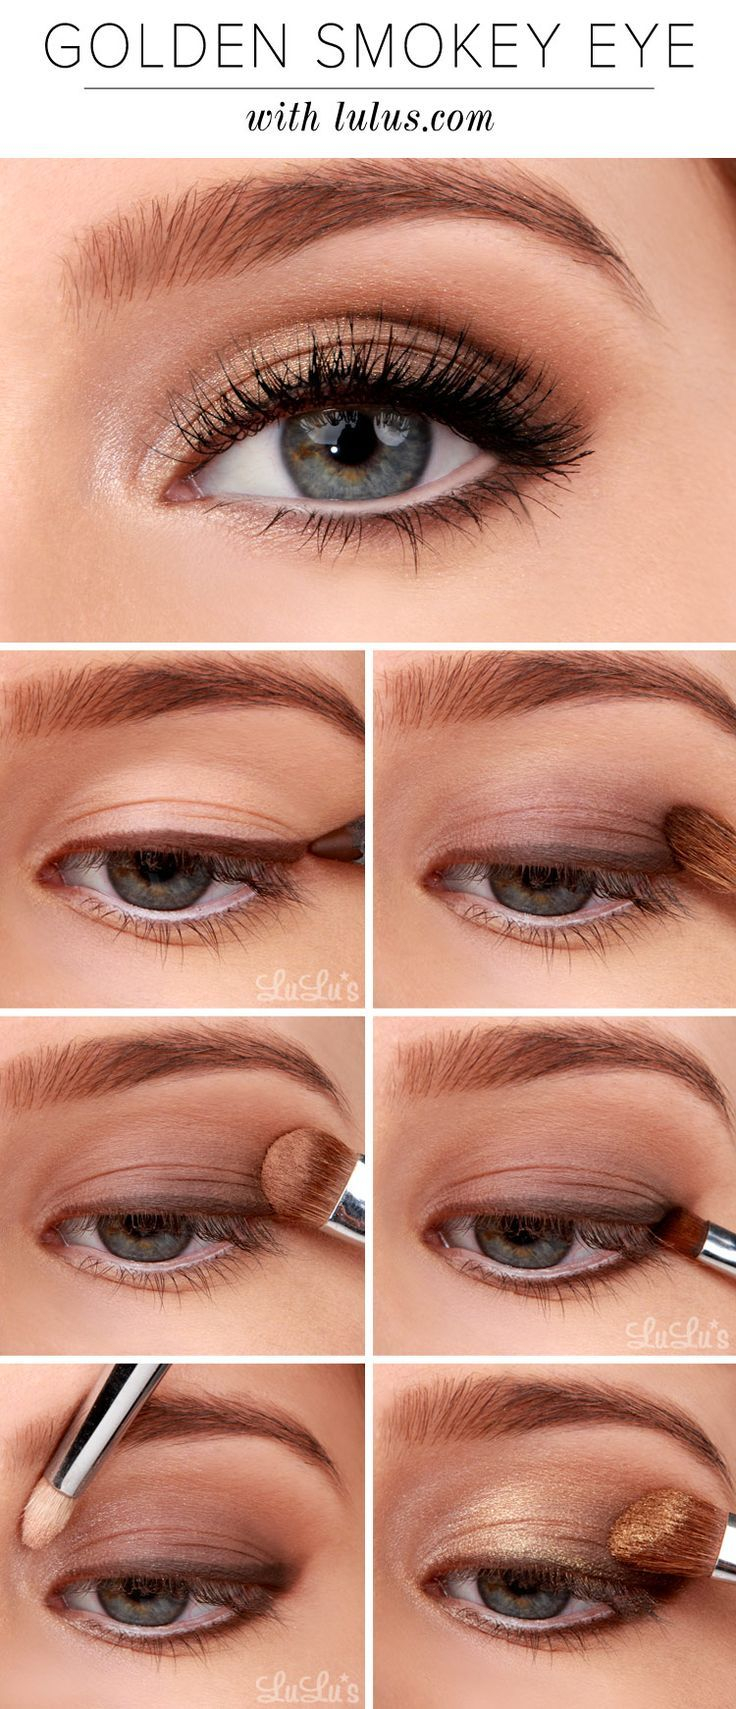 Smokey Eye Makeup Pictures Golden Smokey Eye Makeup Tutorial Pictures Photos And Images For